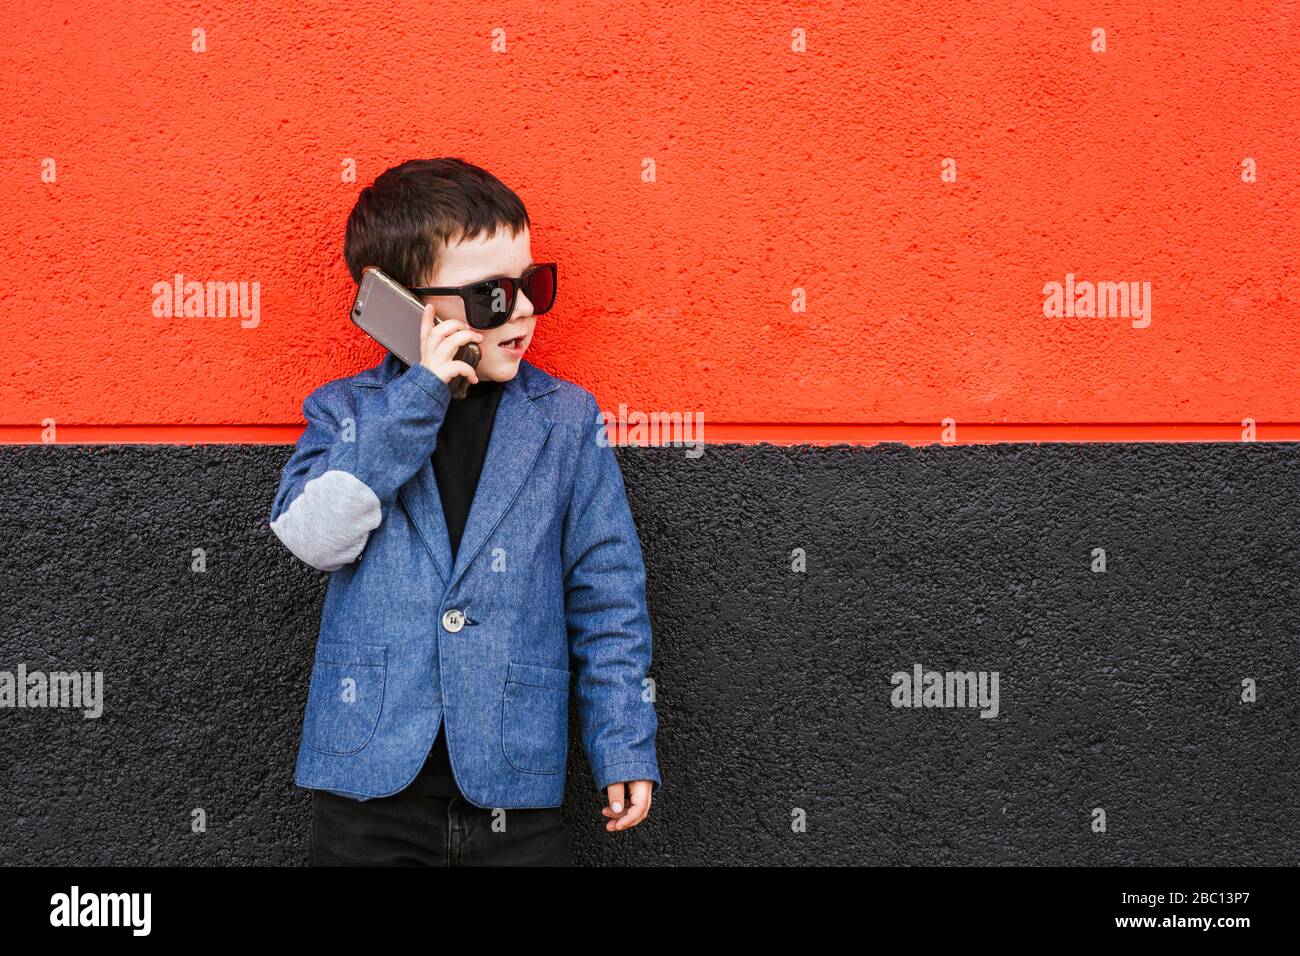 Portrait of little boy on the phone wearing suit coat and oversized sunglasses Stock Photo